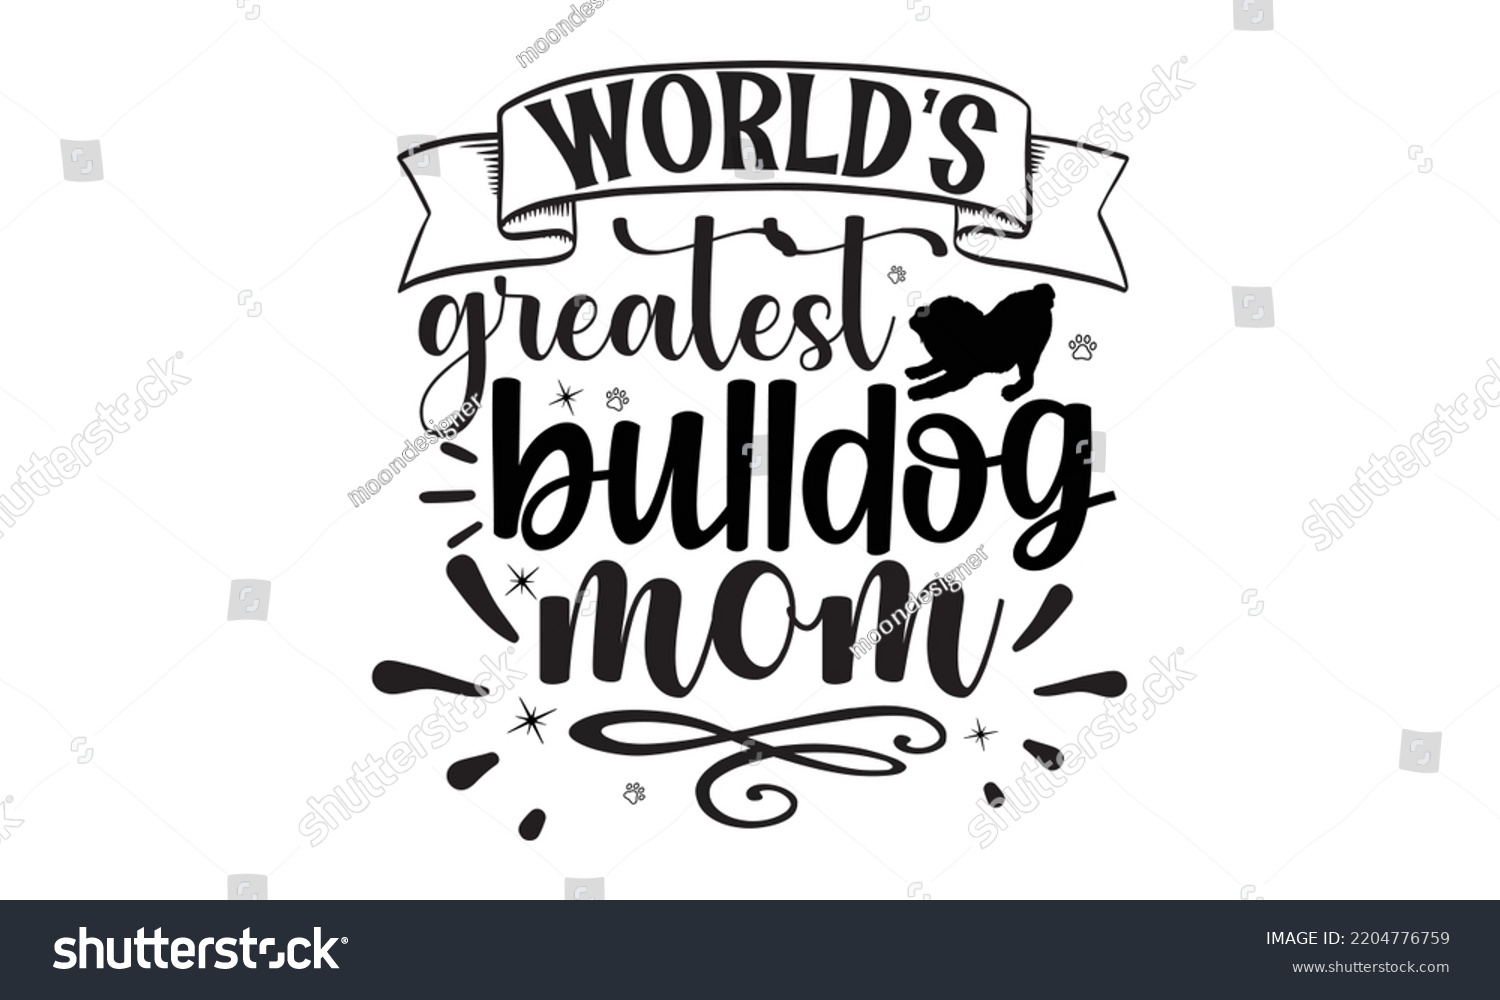 SVG of World’s greatest bulldog mom - Bullodog T-shirt and SVG Design,  Dog lover t shirt design gift for women, typography design, can you download this Design, svg Files for Cutting and Silhouette EPS, 10 svg